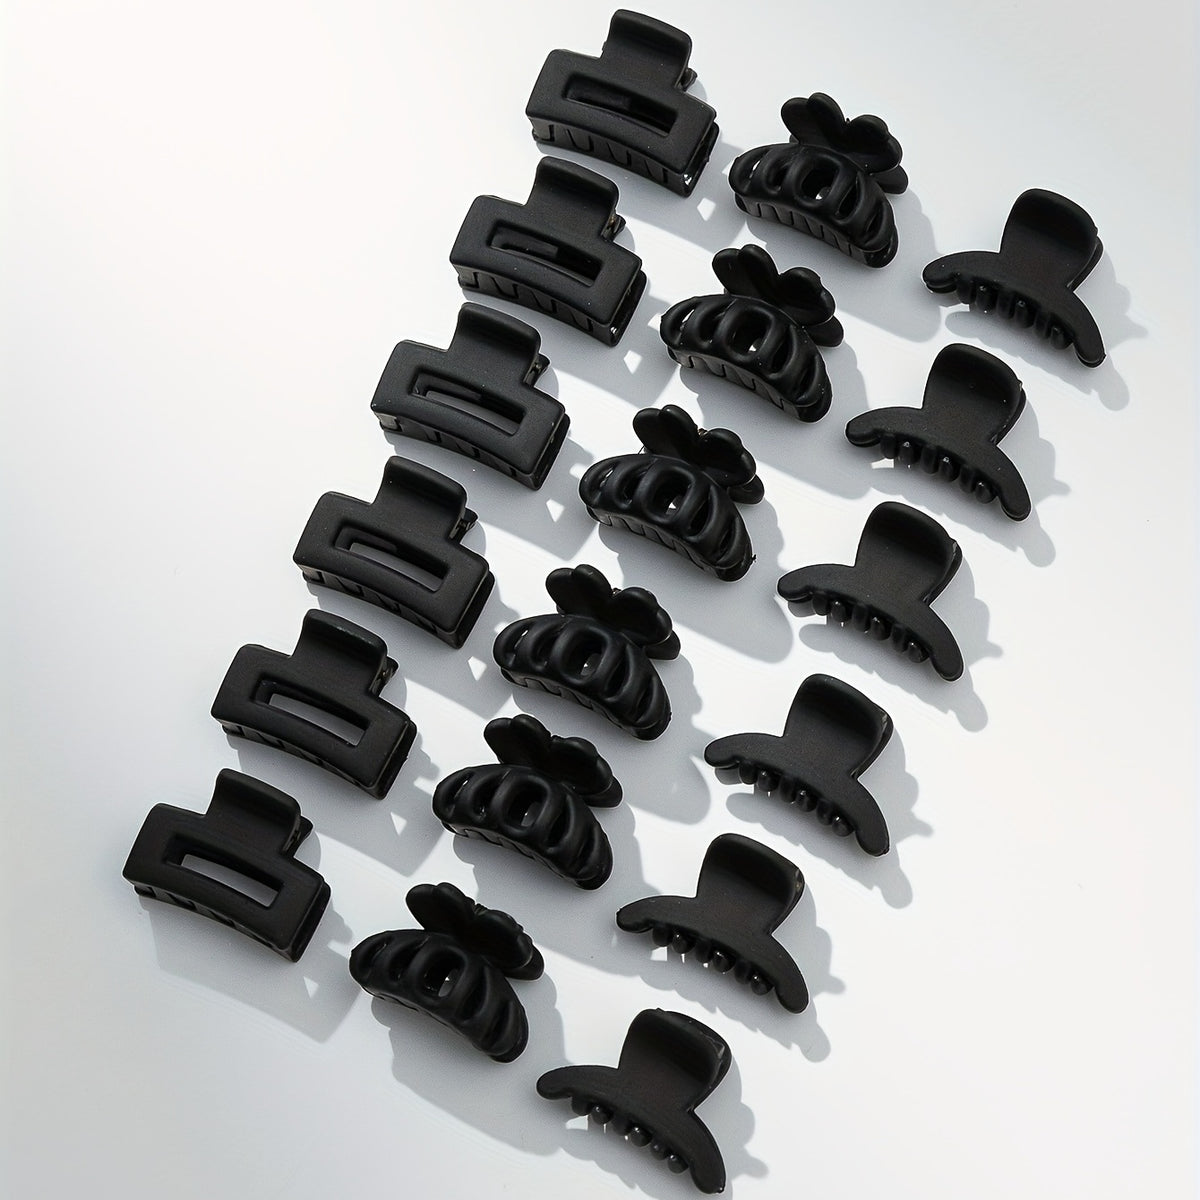 18PCS Rubber Frosted Black Square Hair Claw Mini Small Hair Clip Simple Hair Accessory Female